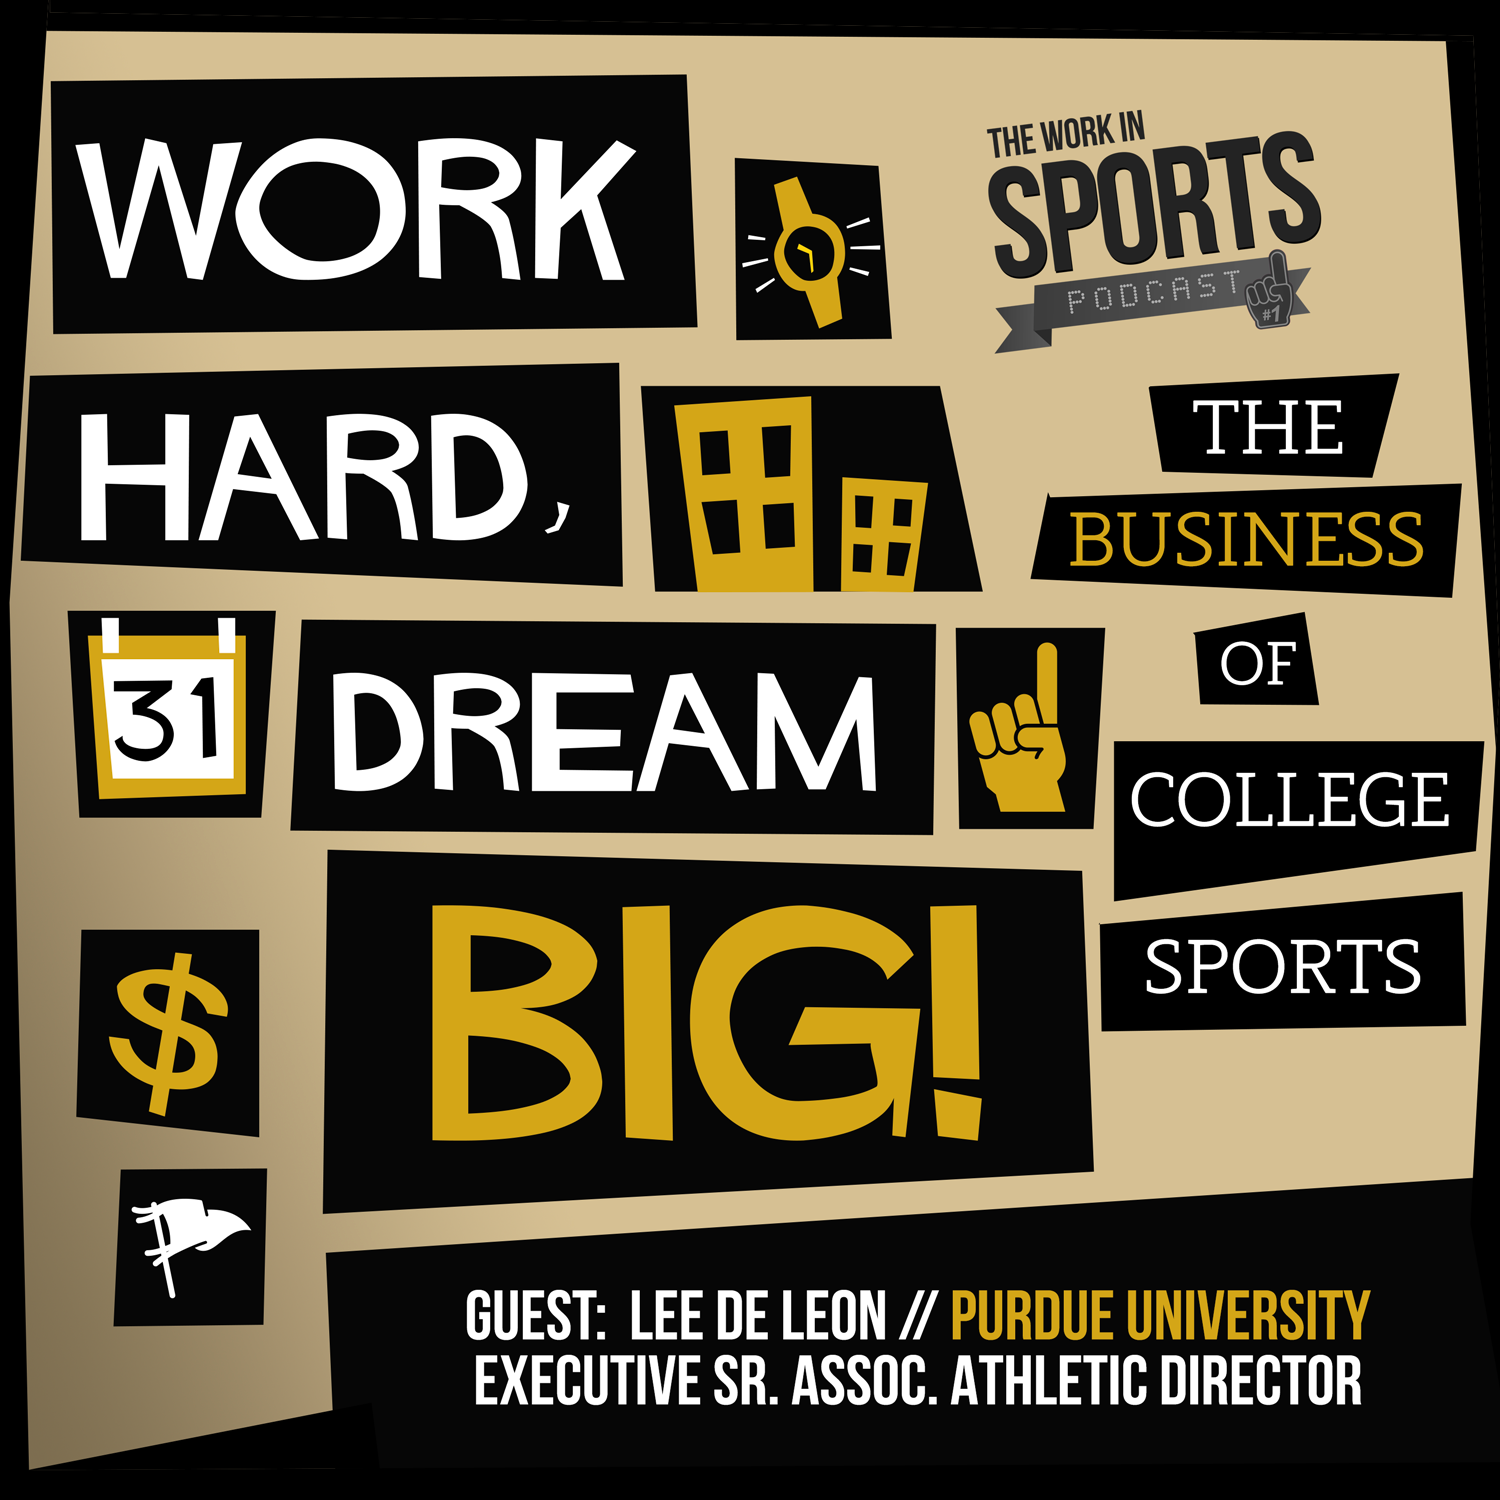 the business of college sports